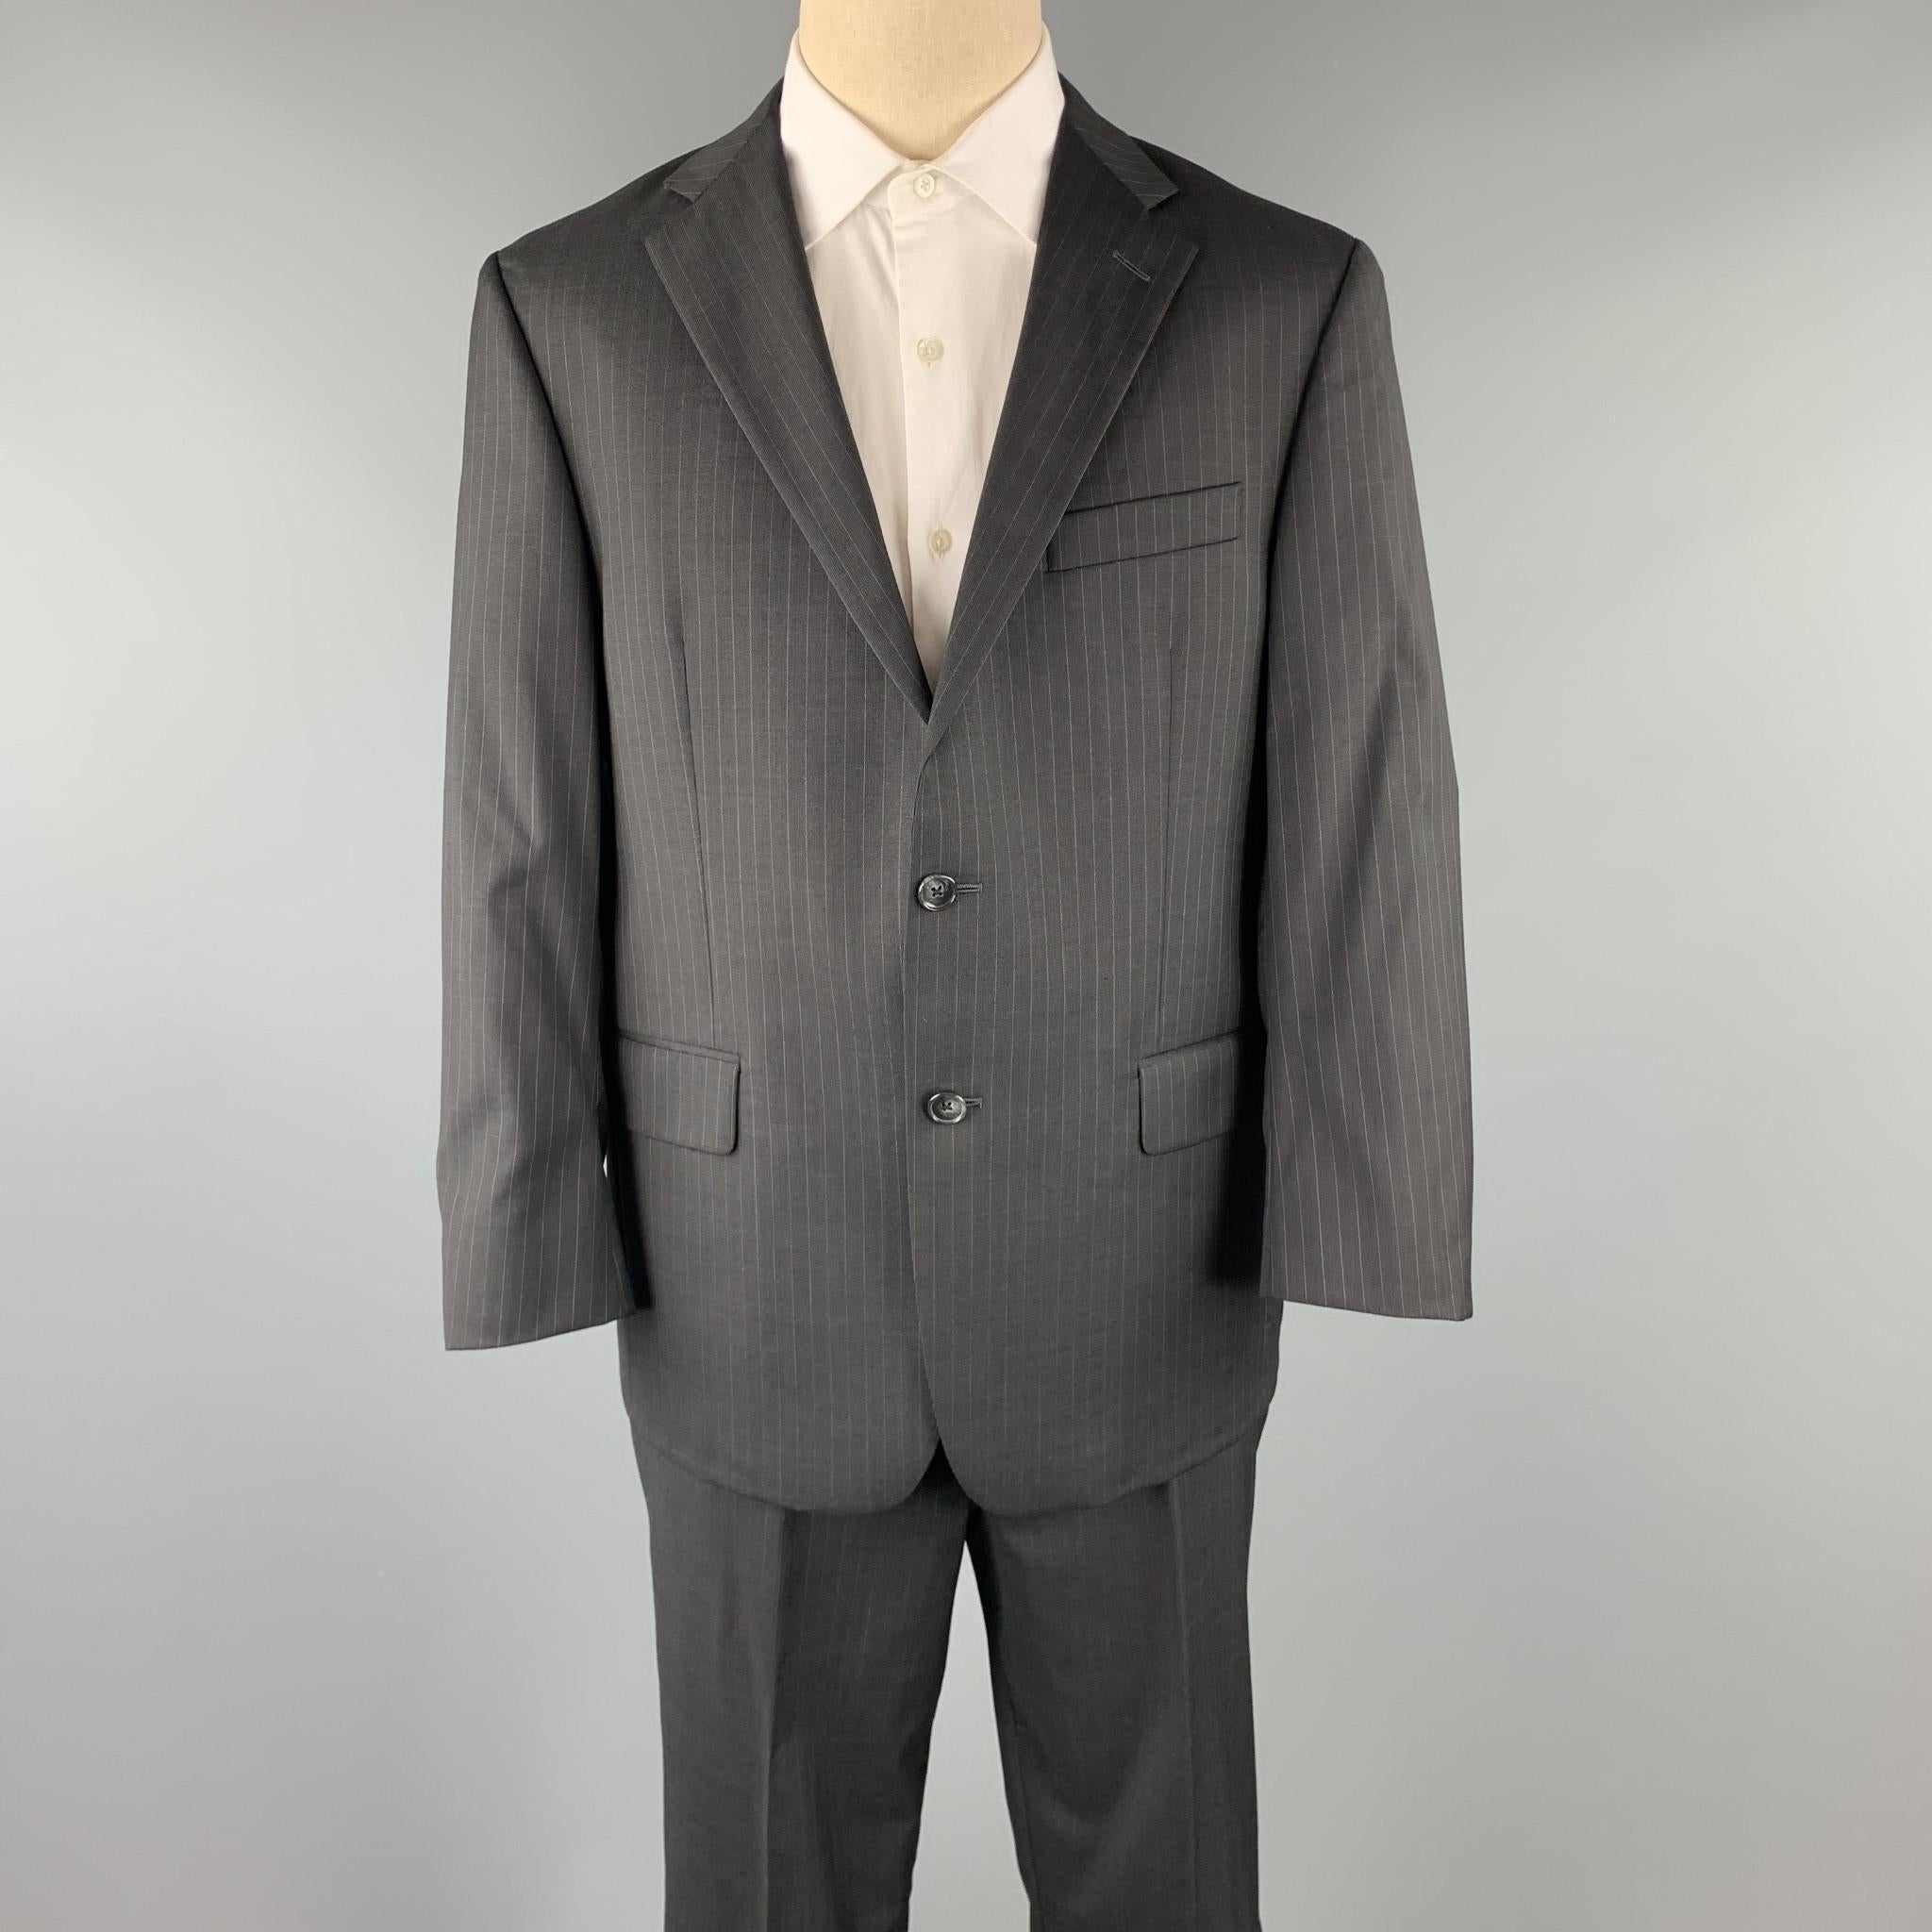 HICKEY FREEMAN suit comes in a black stripe wool and includes a single breasted, two button sport coat with a notch lapel and matching flat front trousers. Made in USA.

Excellent Pre-Owned Condition.
Marked: 42 SHT

Measurements:

-Jacket
Shoulder: